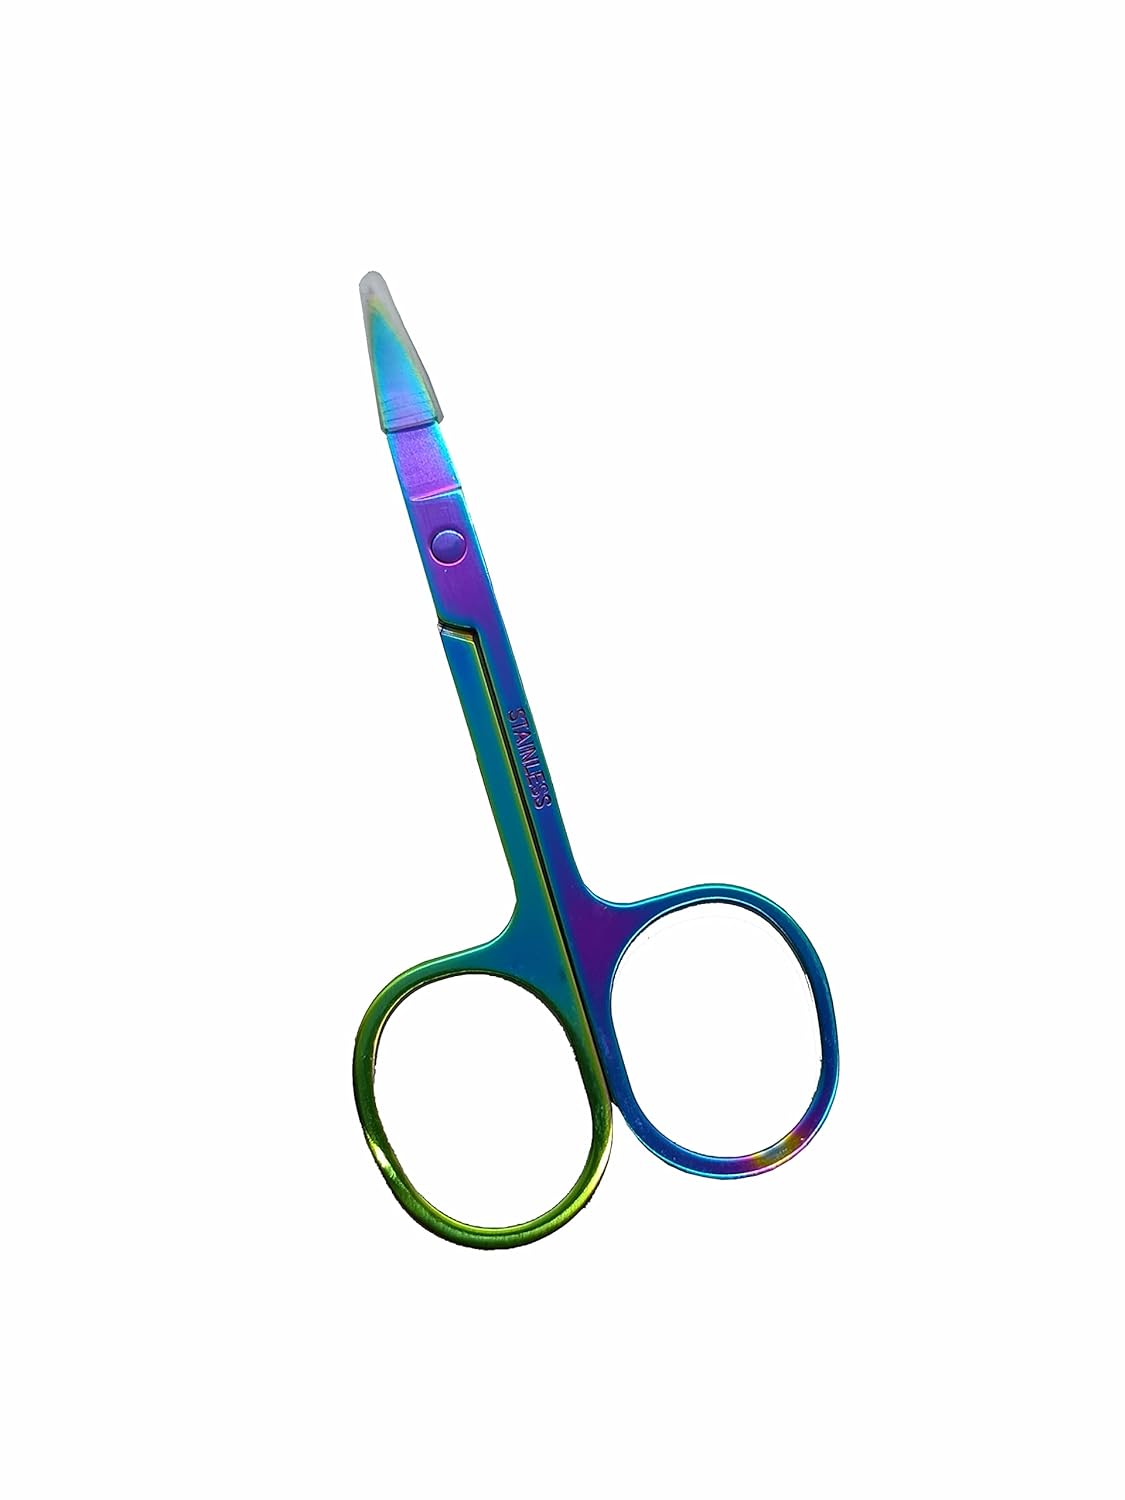 Stainless Steel Mini Nail Cuticle Beauty Color Rainbow Scissors 